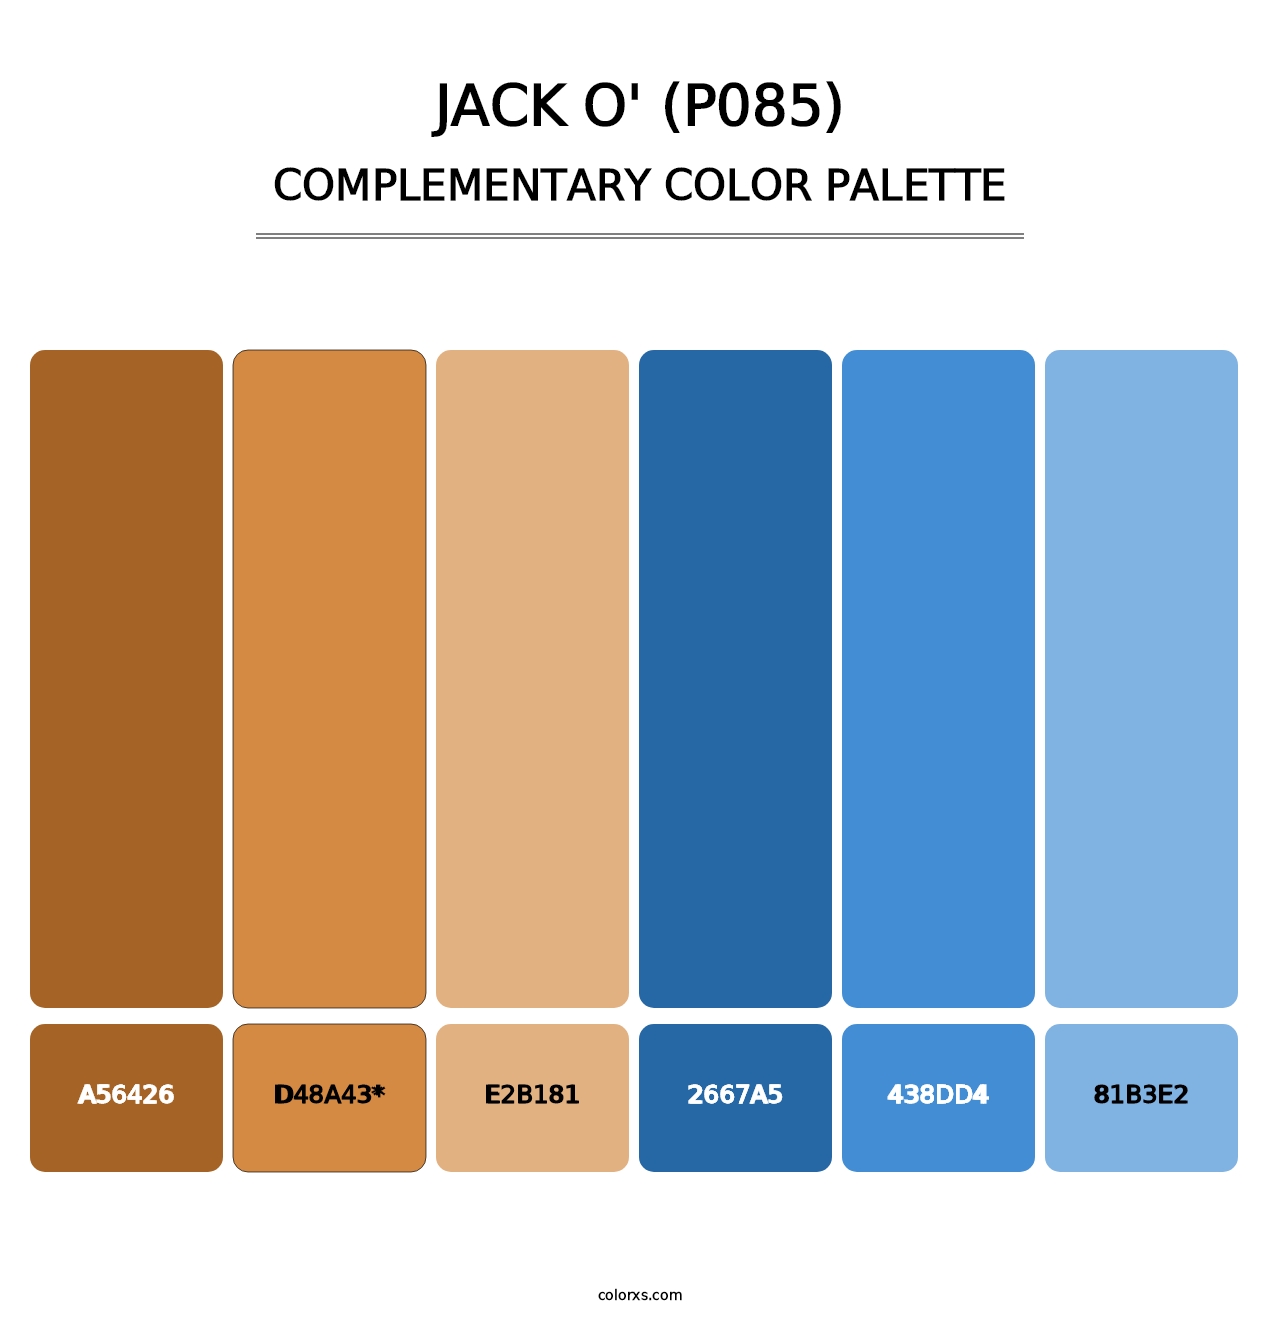 Jack O' (P085) - Complementary Color Palette